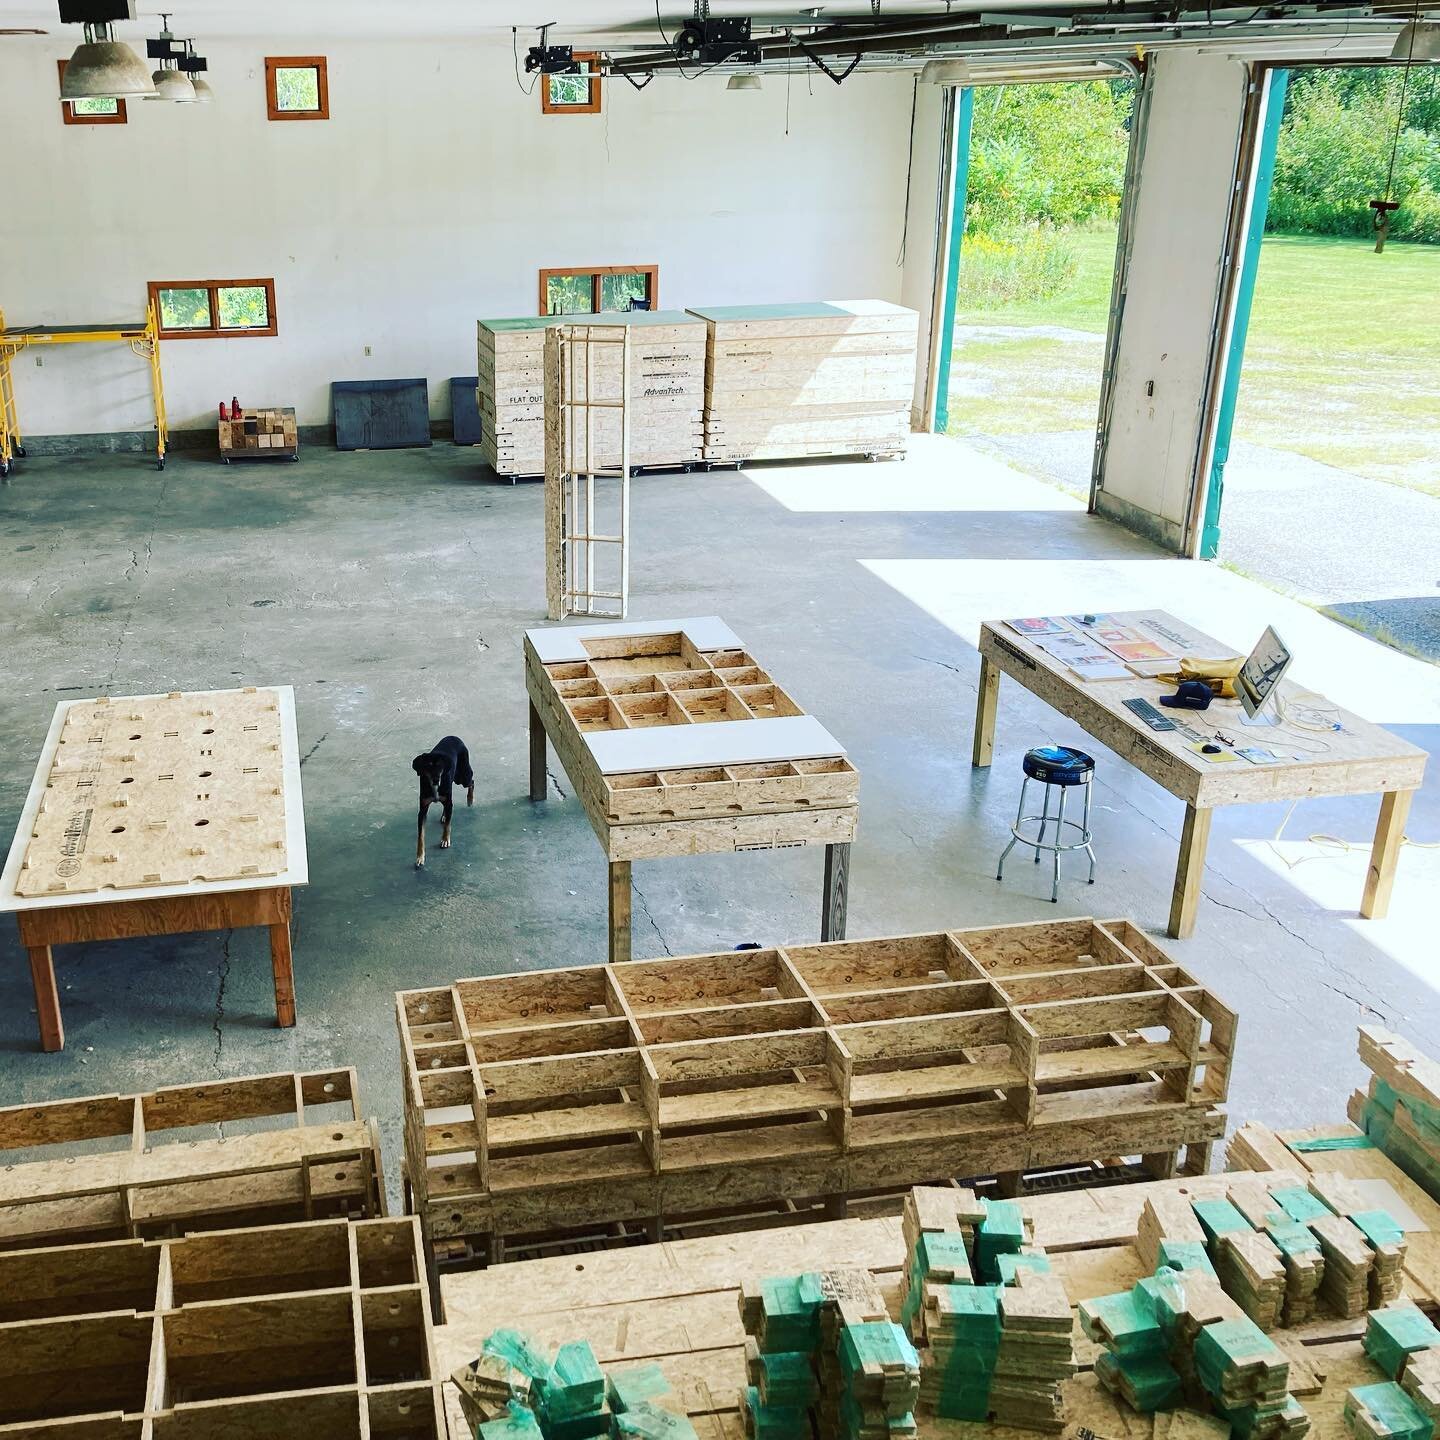 George and the Big Space are getting ready for our fall production run! 
. 
.
.
#upendthis #findyourorbit #changetheworld #architecture #sustainability #modular #design #innovation #vermontbyvermonters #vermontermade #entrepreneur #love #beautiful #s